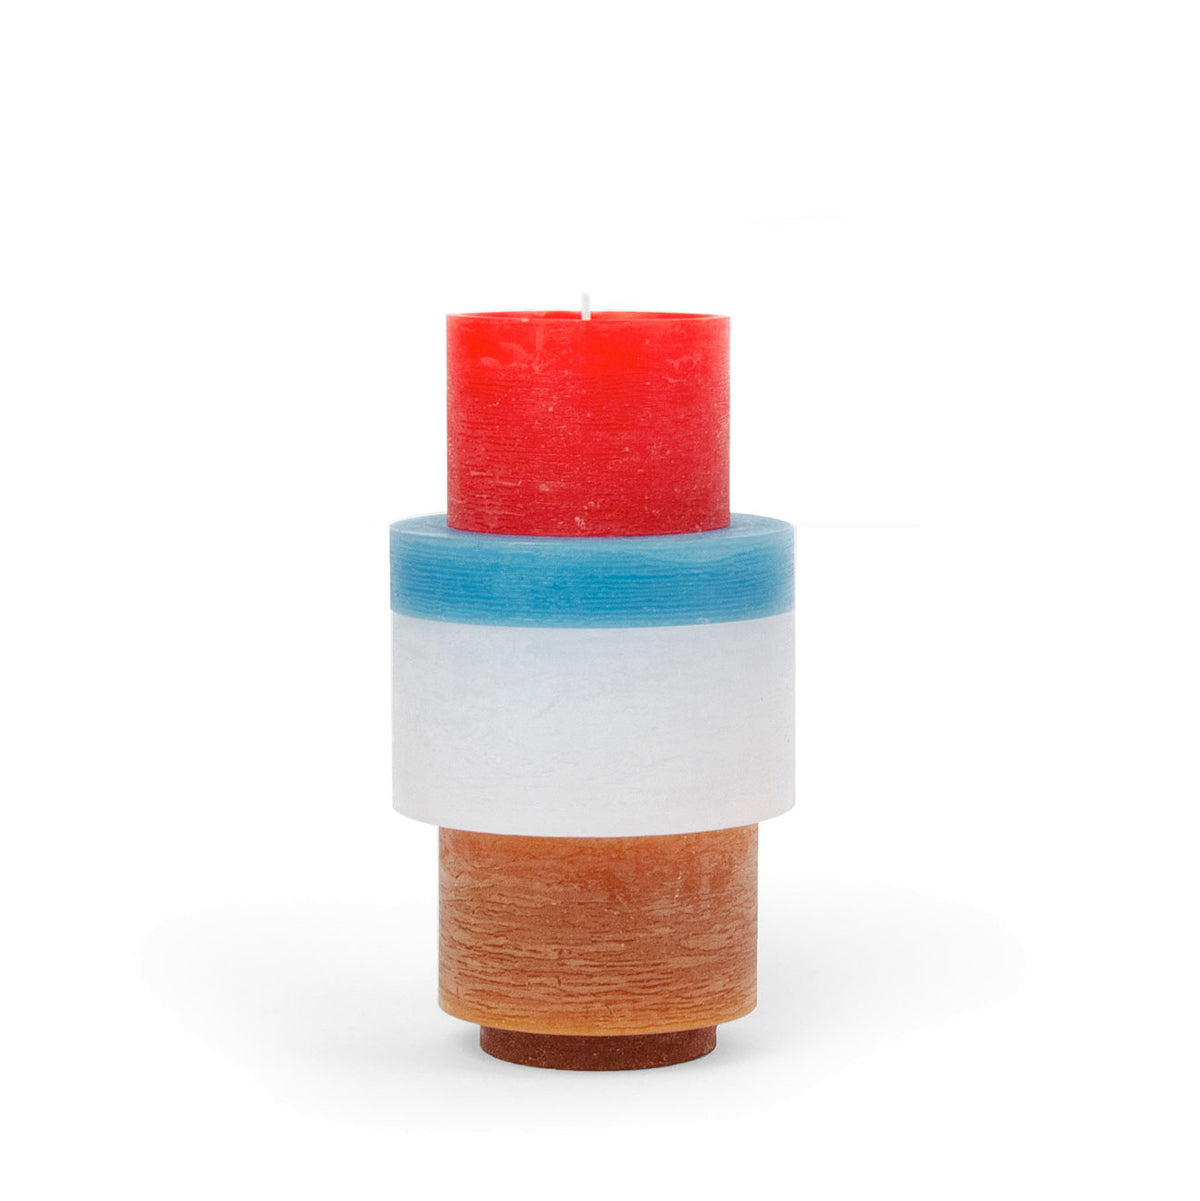 Stan Editions, Candl Stack 05, Candle,